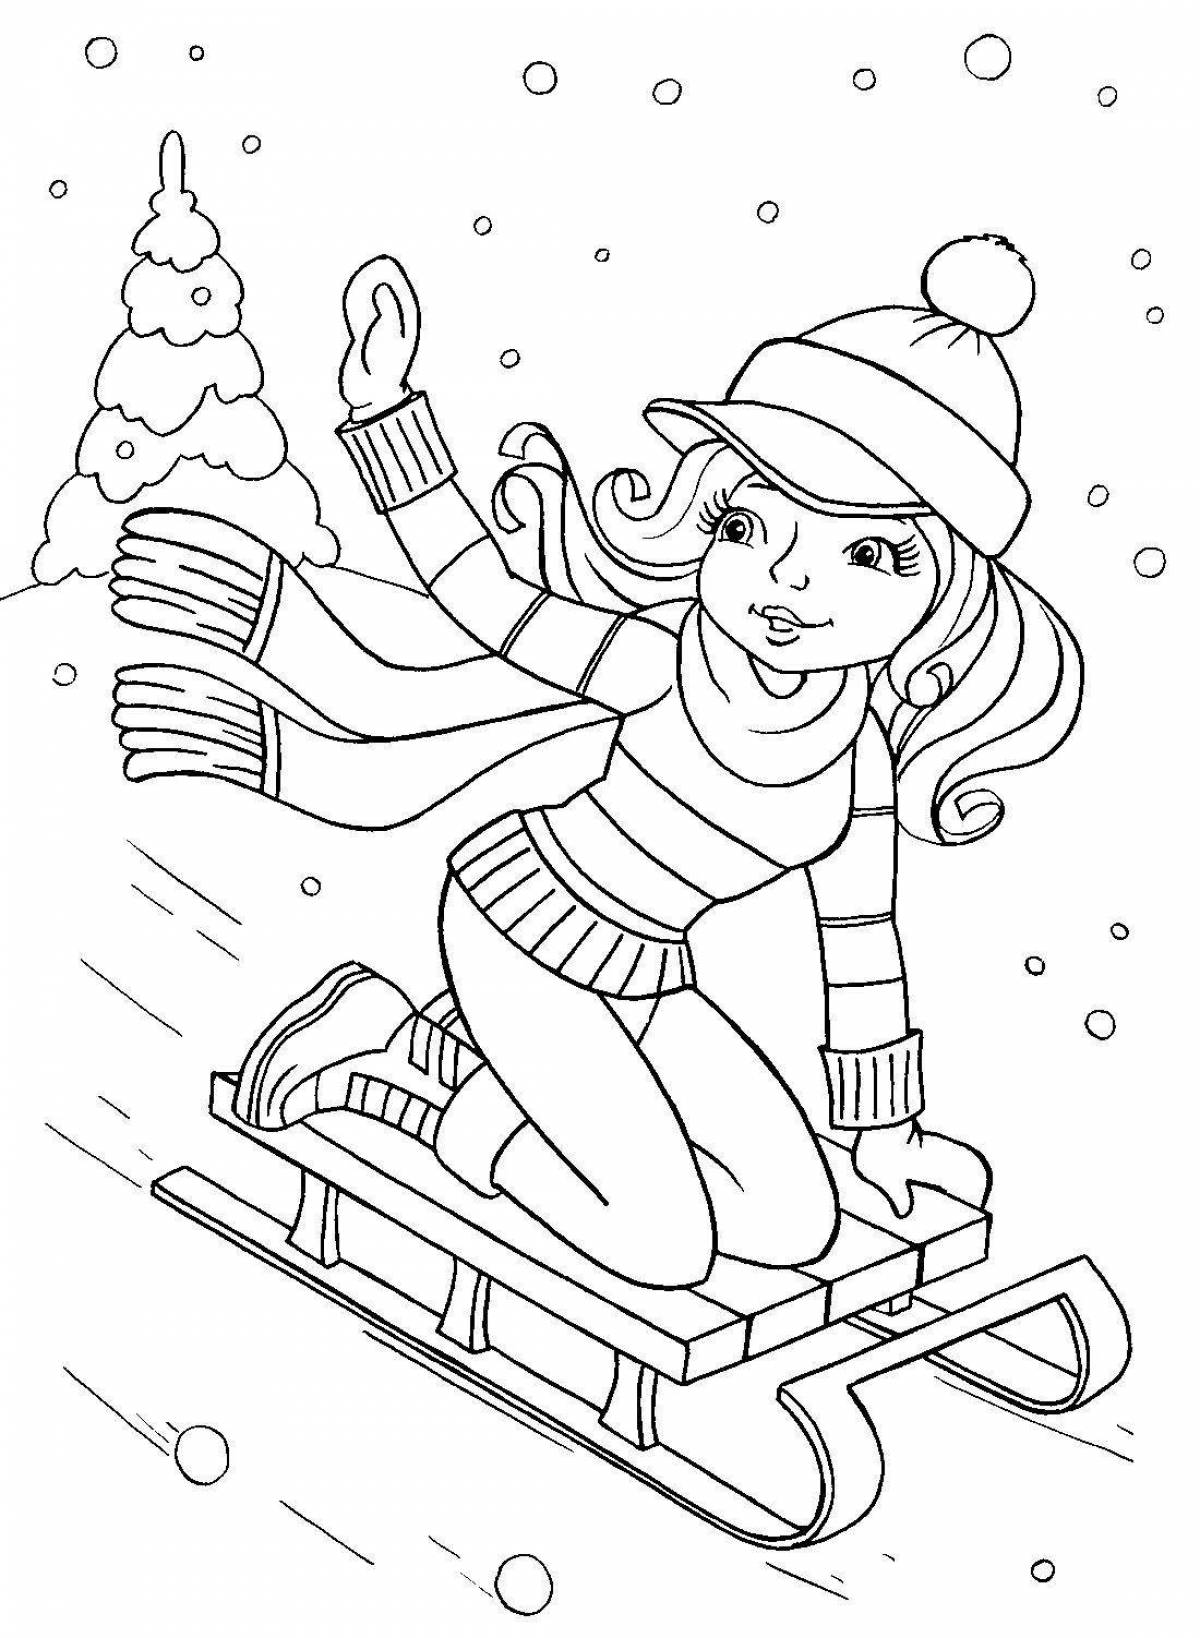 Bright coloring for sledding